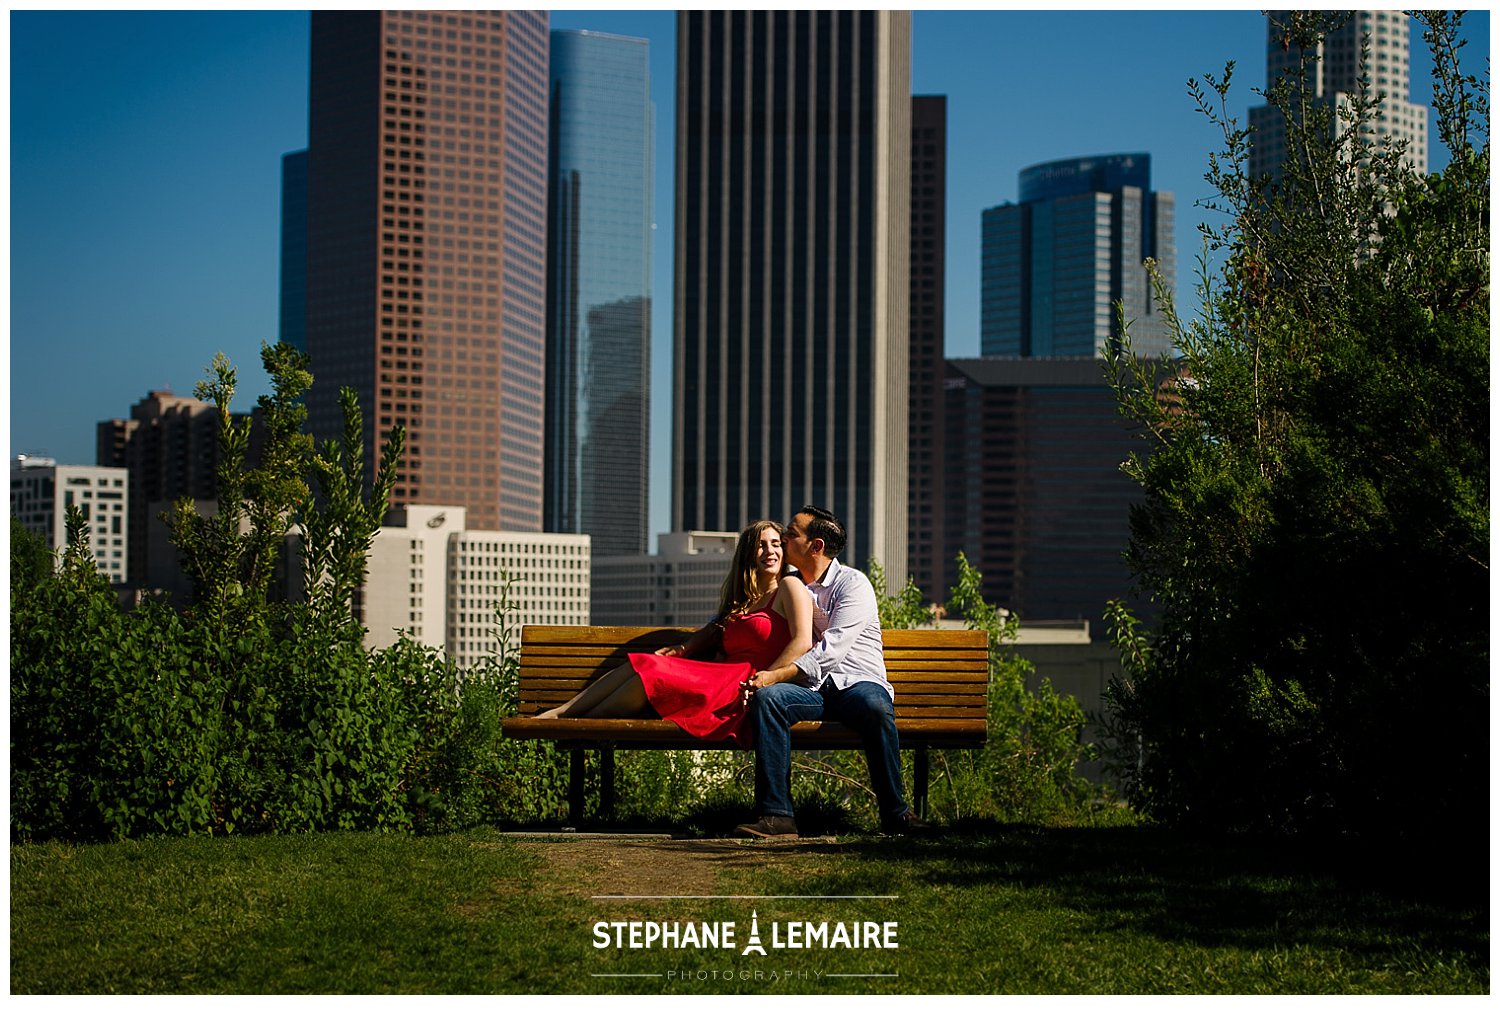 Skyline of Los angeles with a couple on a bench